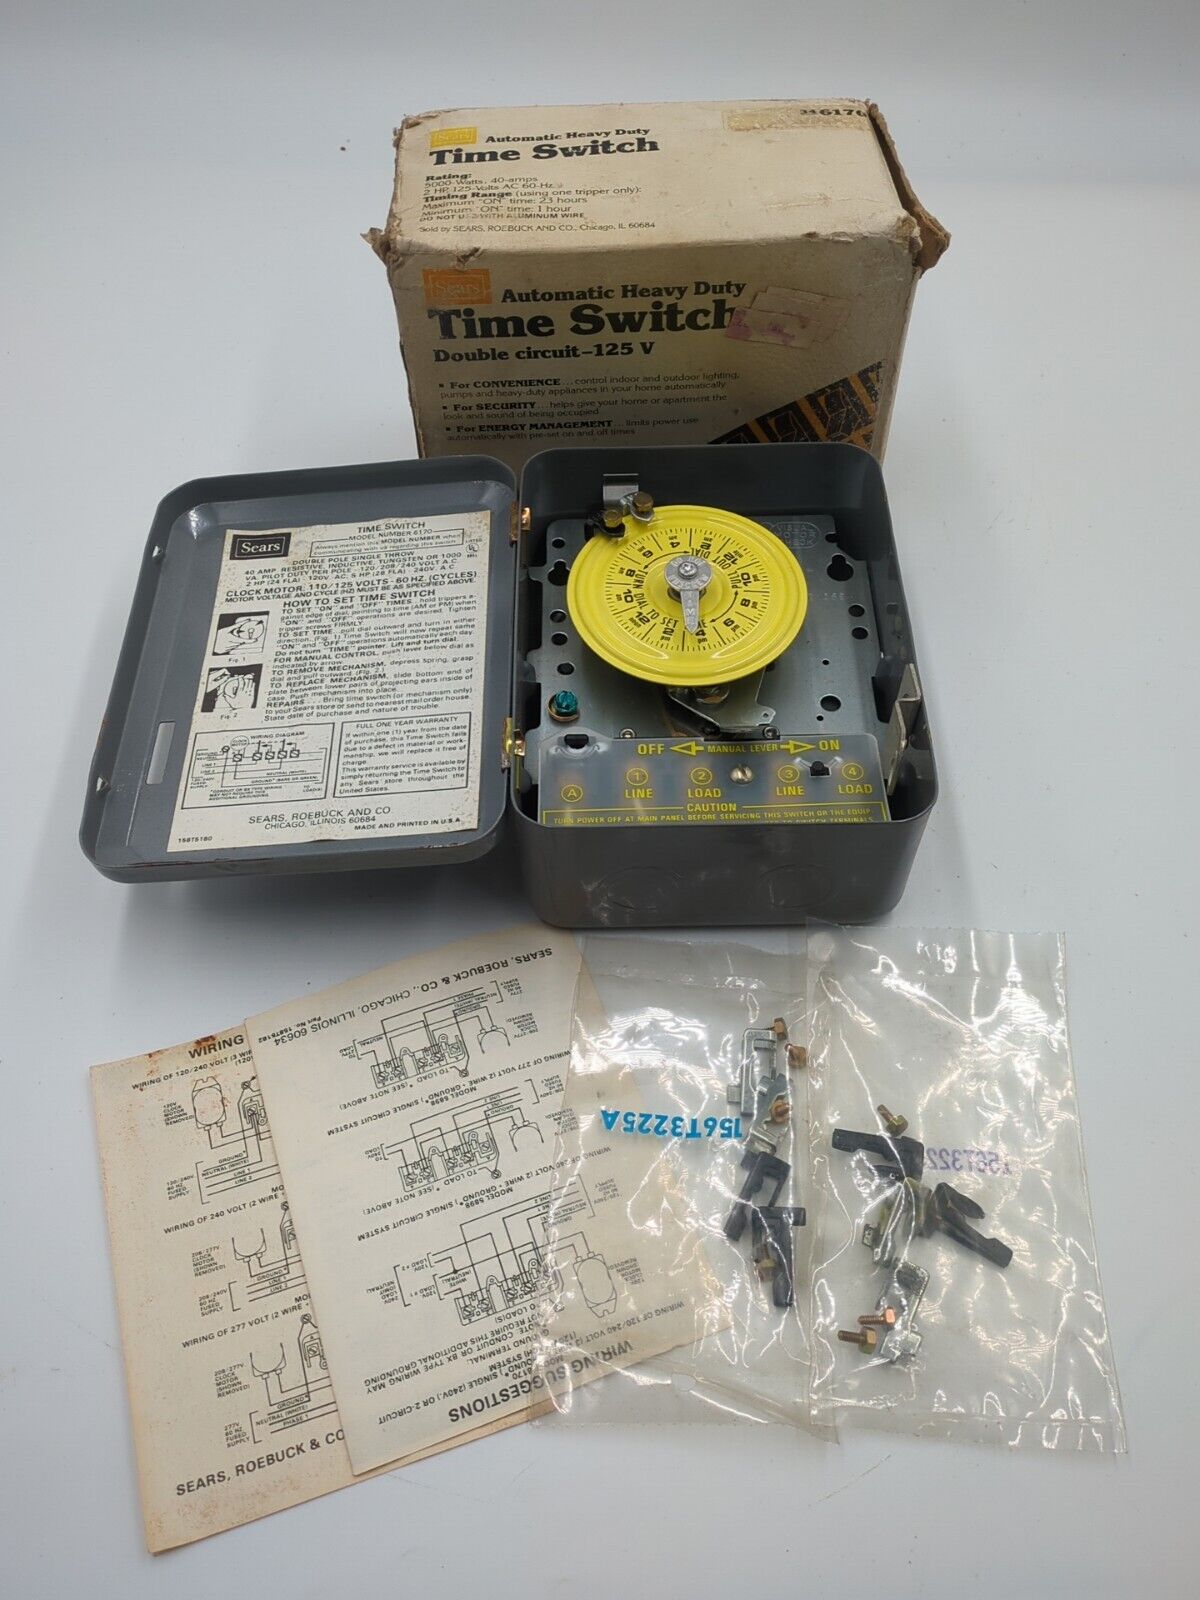 Sears Vintage All Purpose Time Switch 6170 in Original Box with Owner's Manual